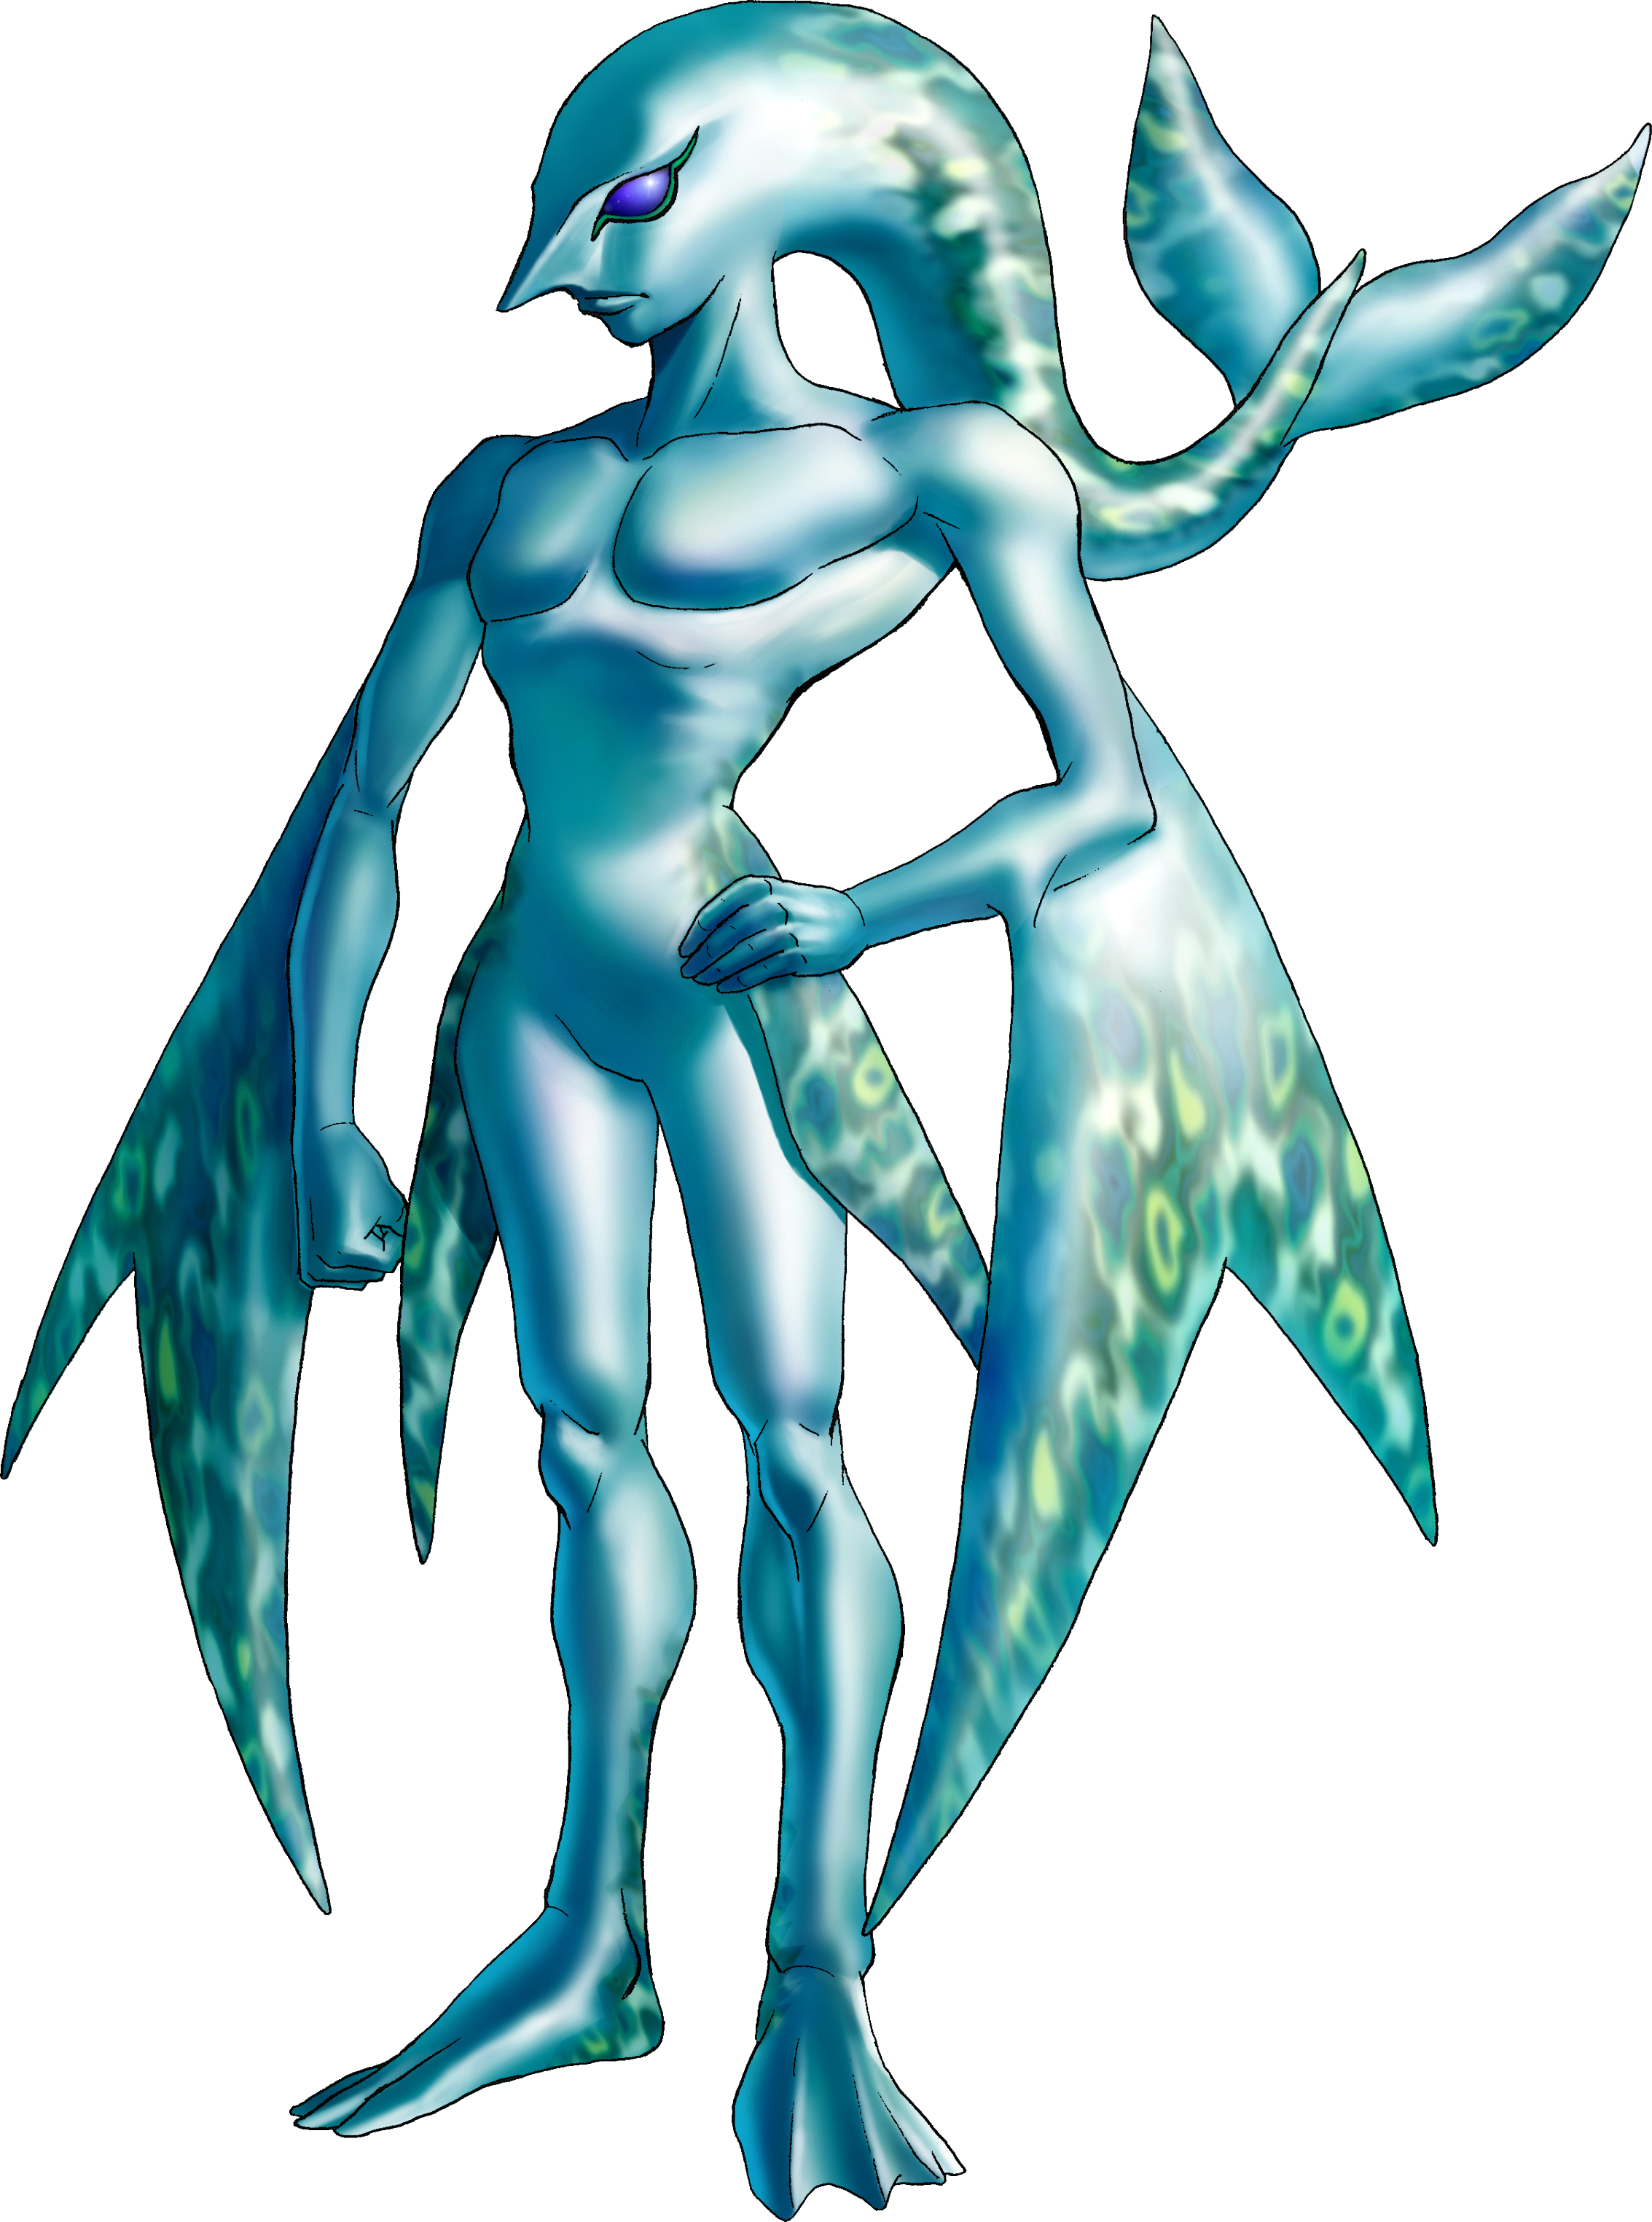 Female Zora concepts from different regions of Hyrule.